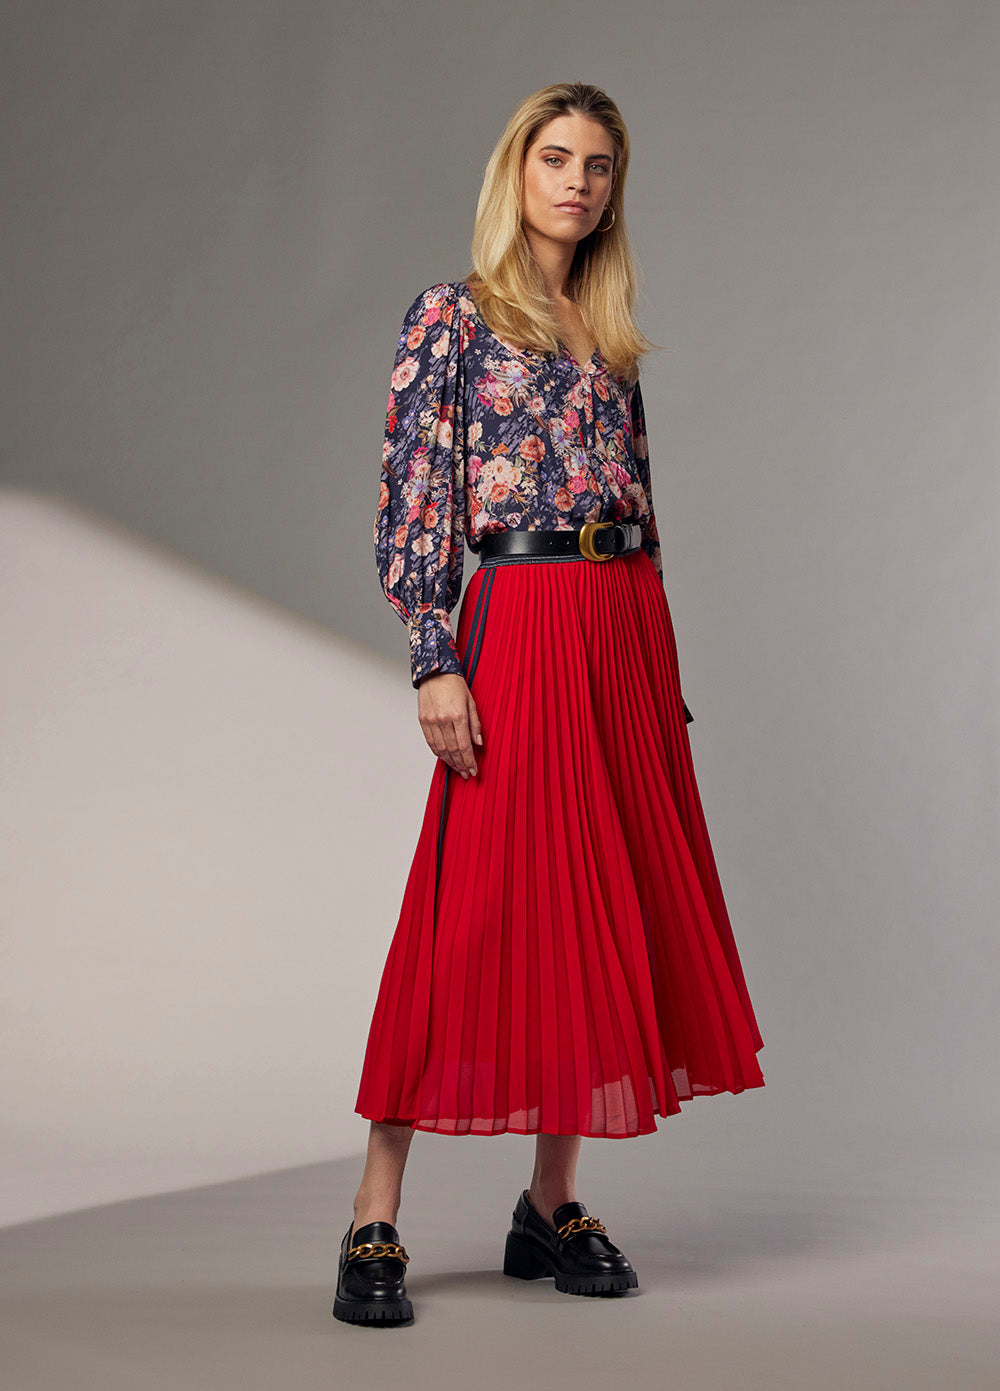 Madly Sweetly Just Pleat It Skirt - Scarlet